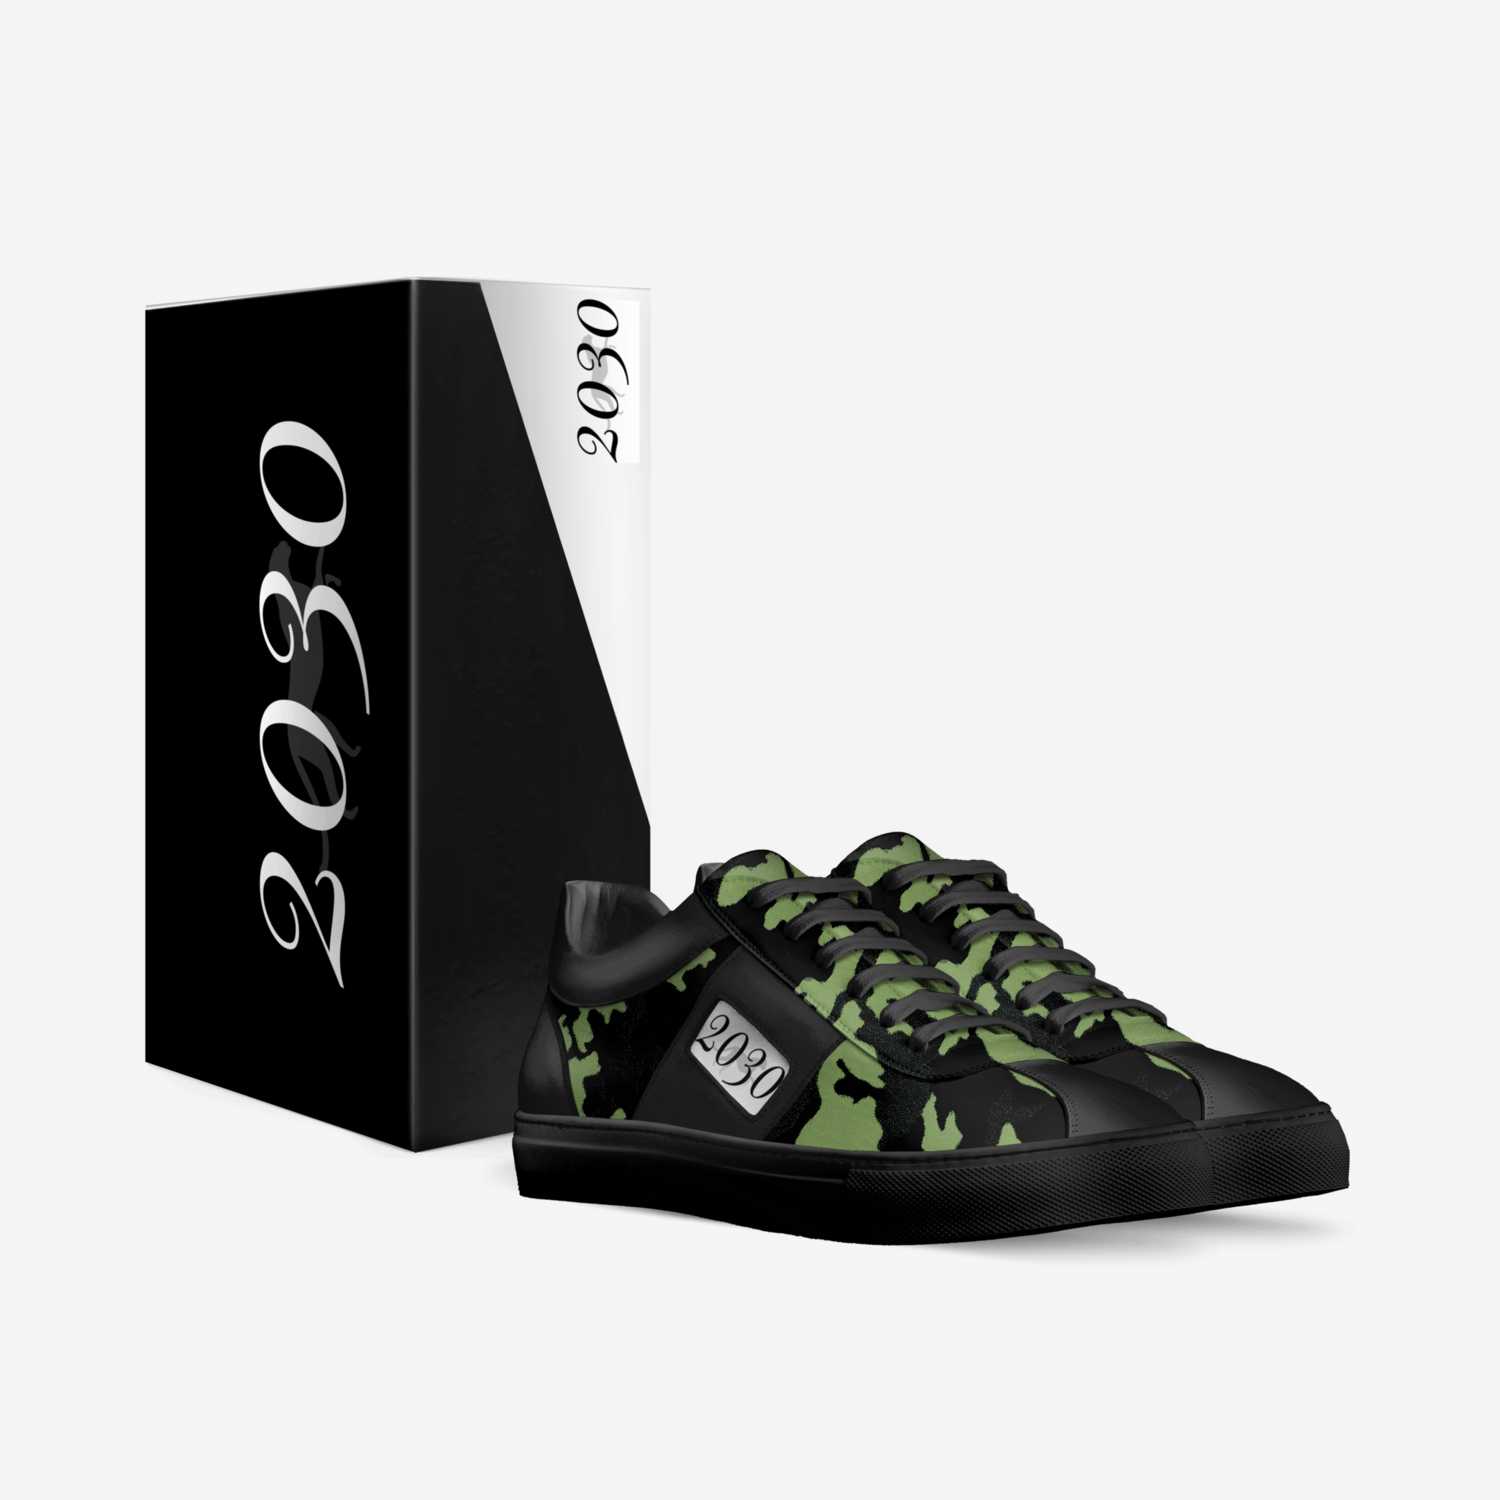 2030 custom made in Italy shoes by JuVon | Box view